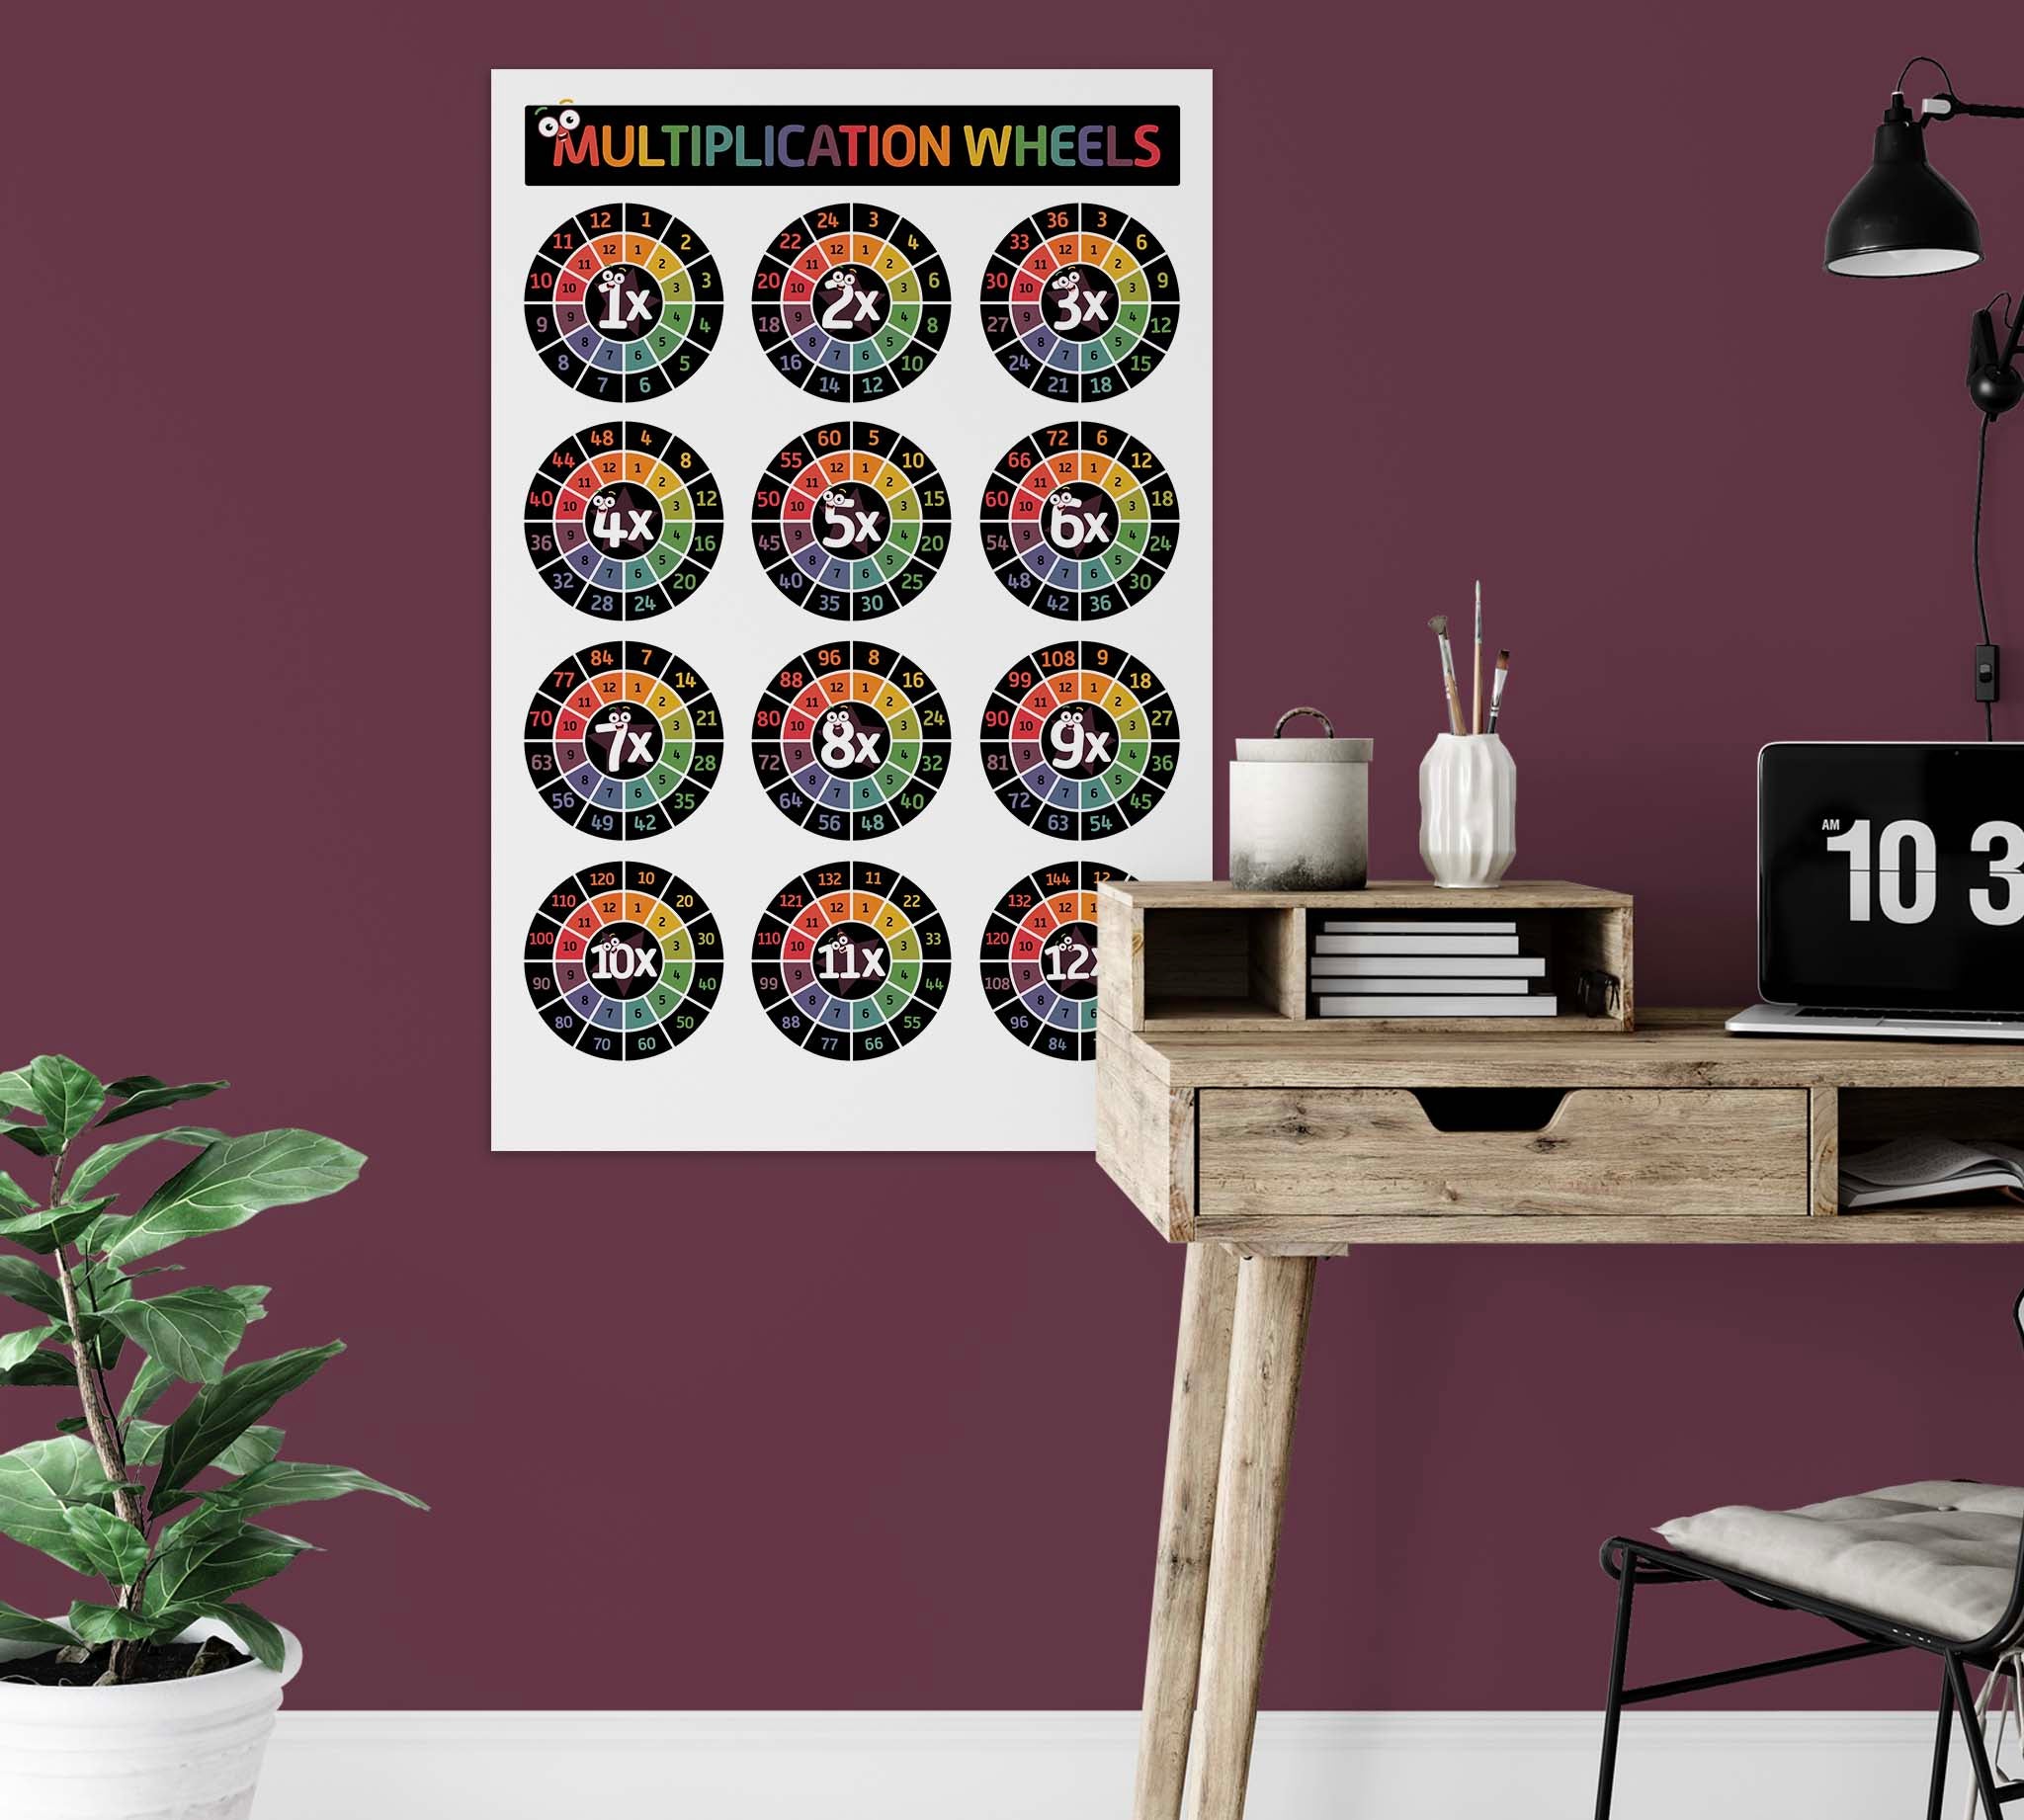 Multiplication Times Tables Poster 24x36